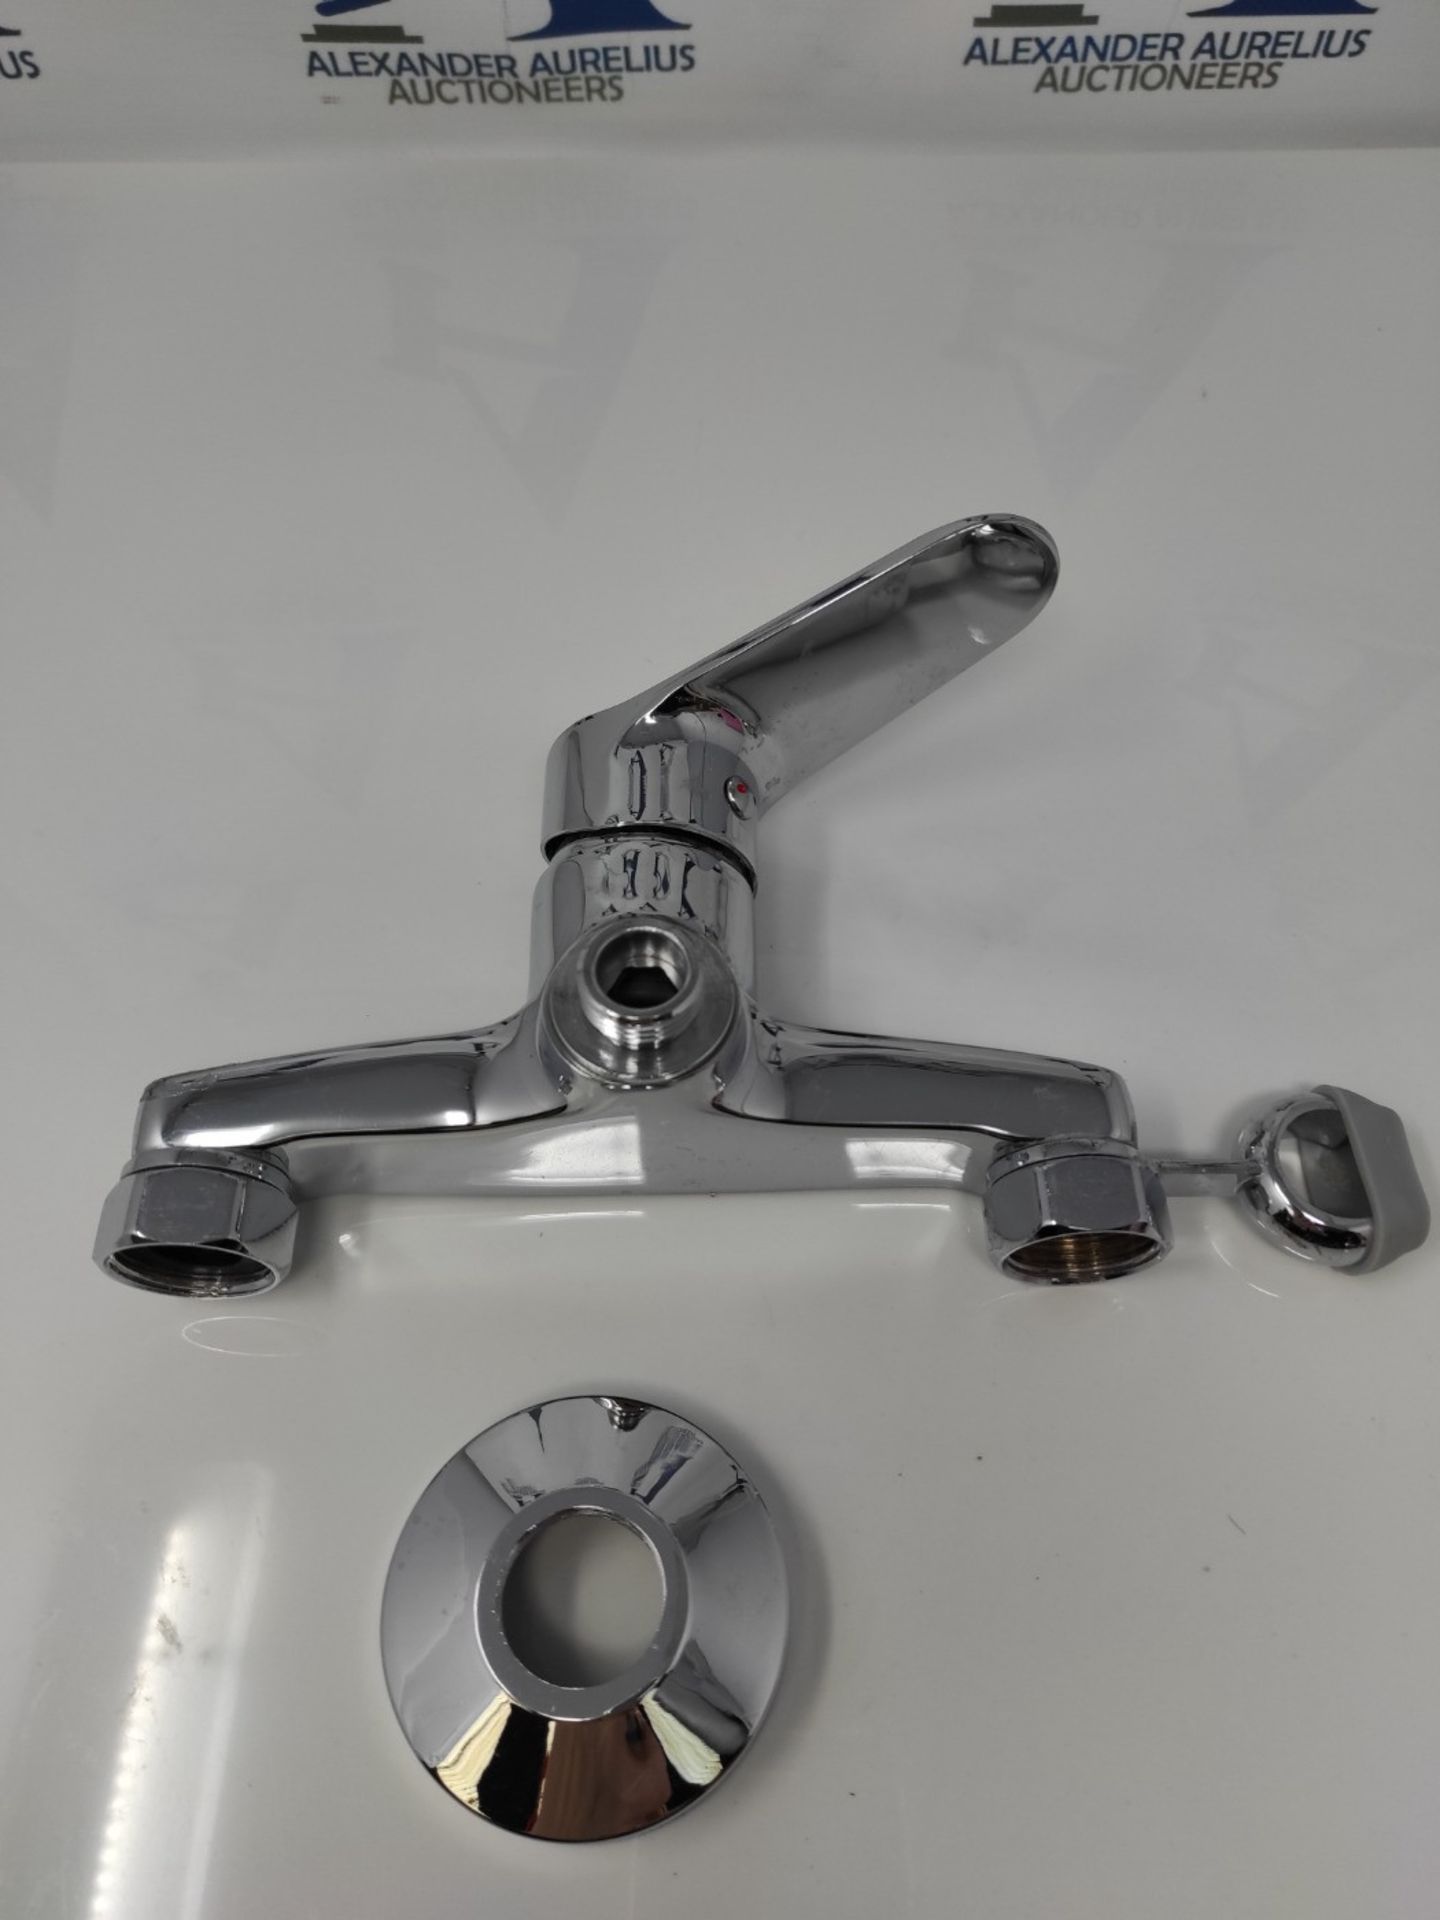 Ibergrif Shower Mixer Valve Wall Mounted, Shower Faucet Single Lever Shower Mixer Bar, - Image 2 of 2